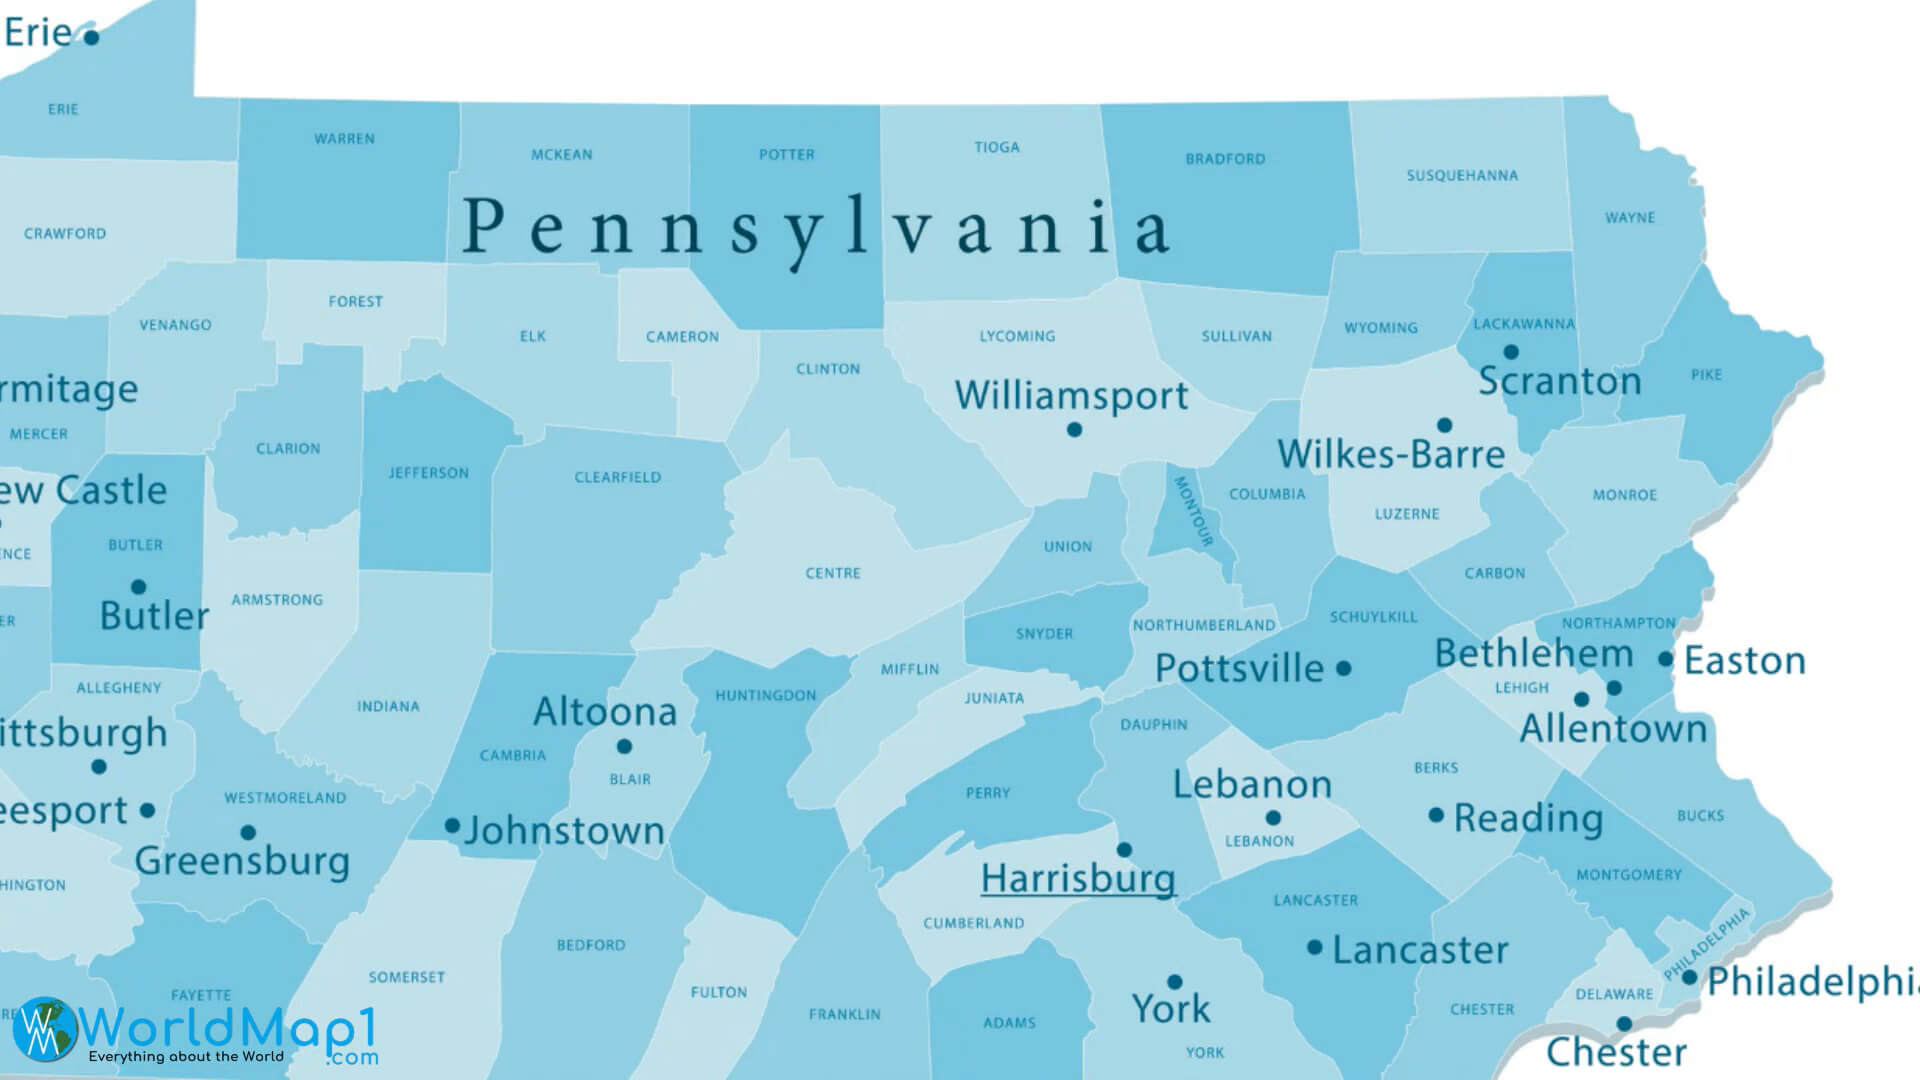 Pennsylvania Cities and Counties Map